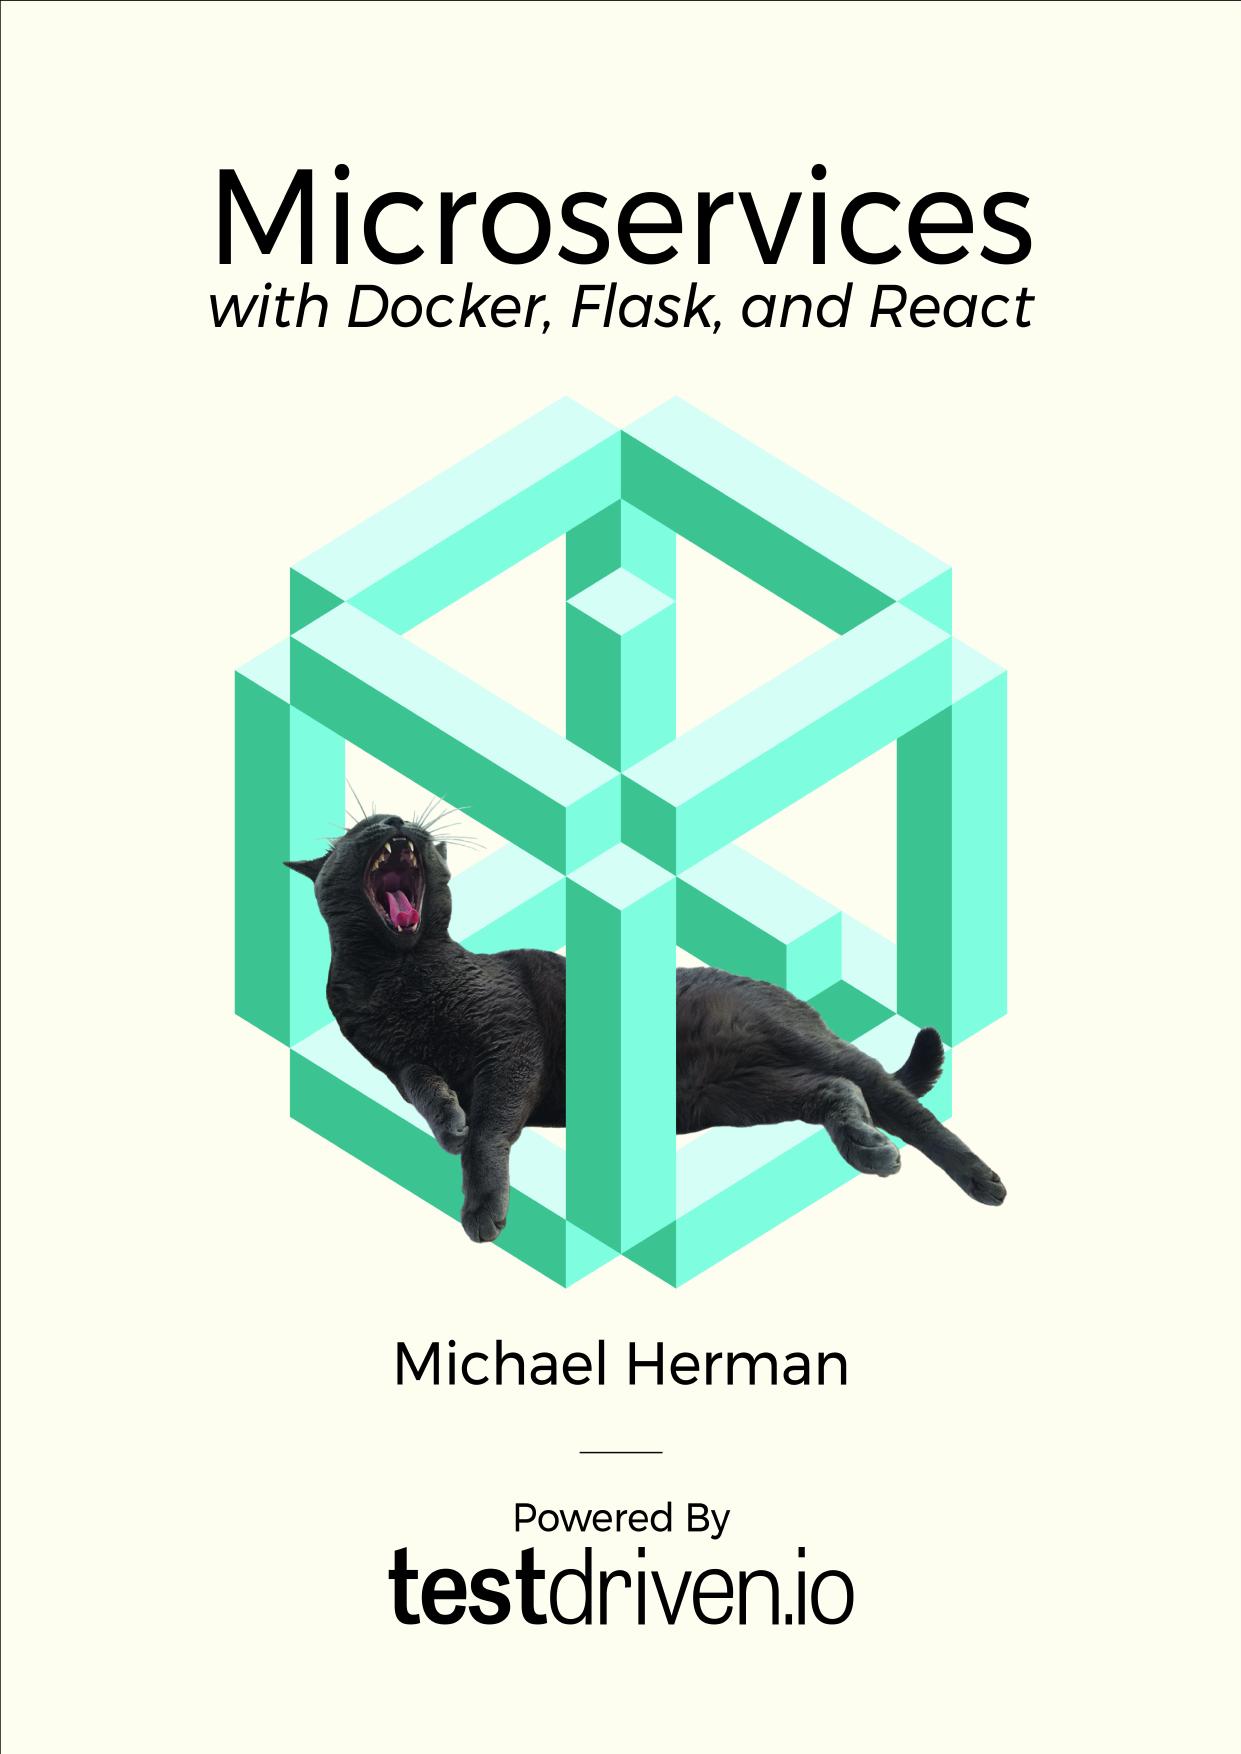 Microservices with Docker, Flask, and React